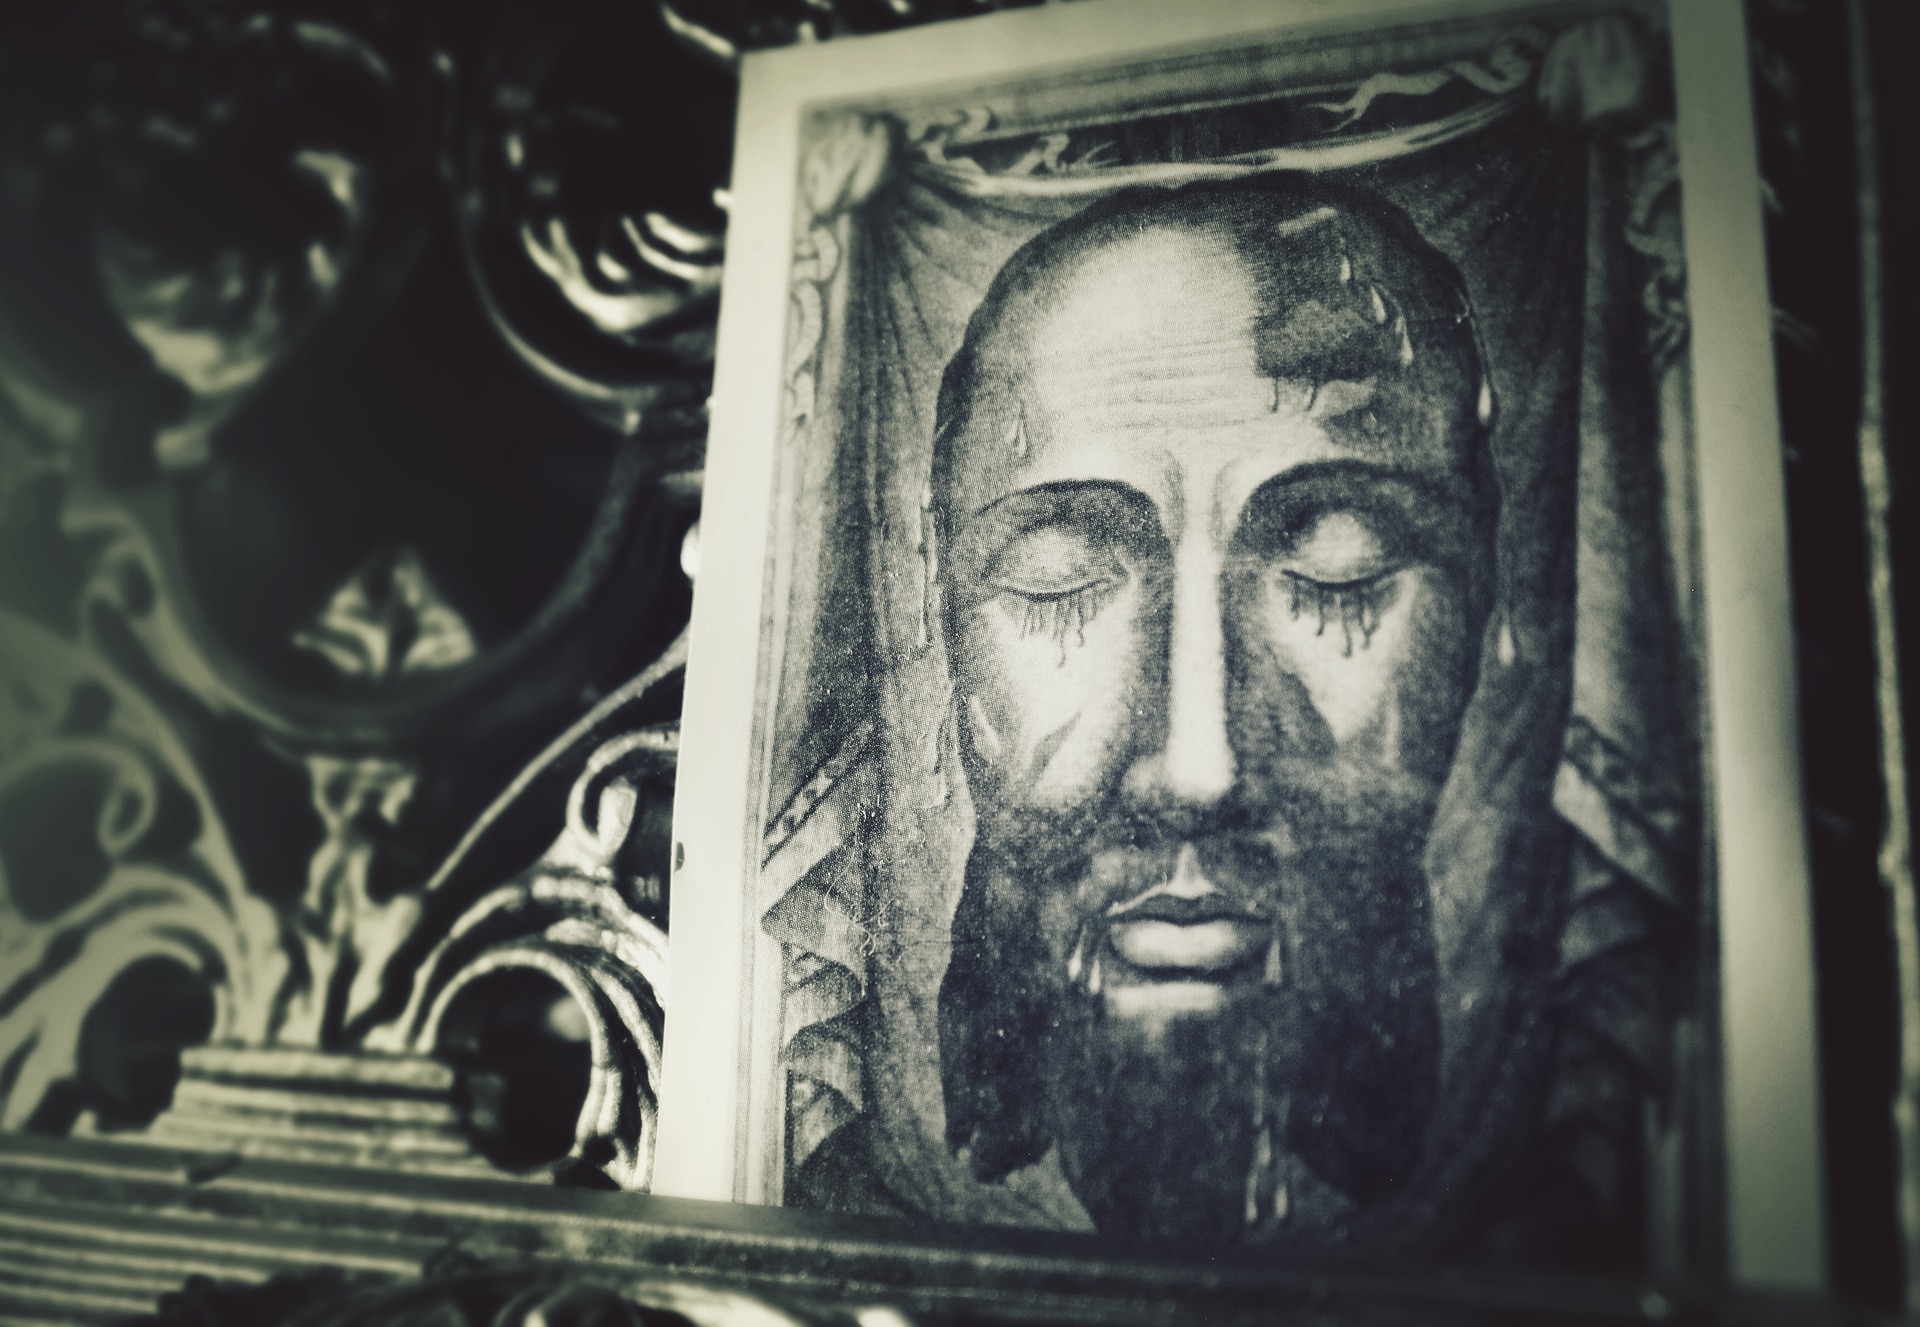 The holy face of Jesus, I Am, from today's reading with Wes Schaeffer.